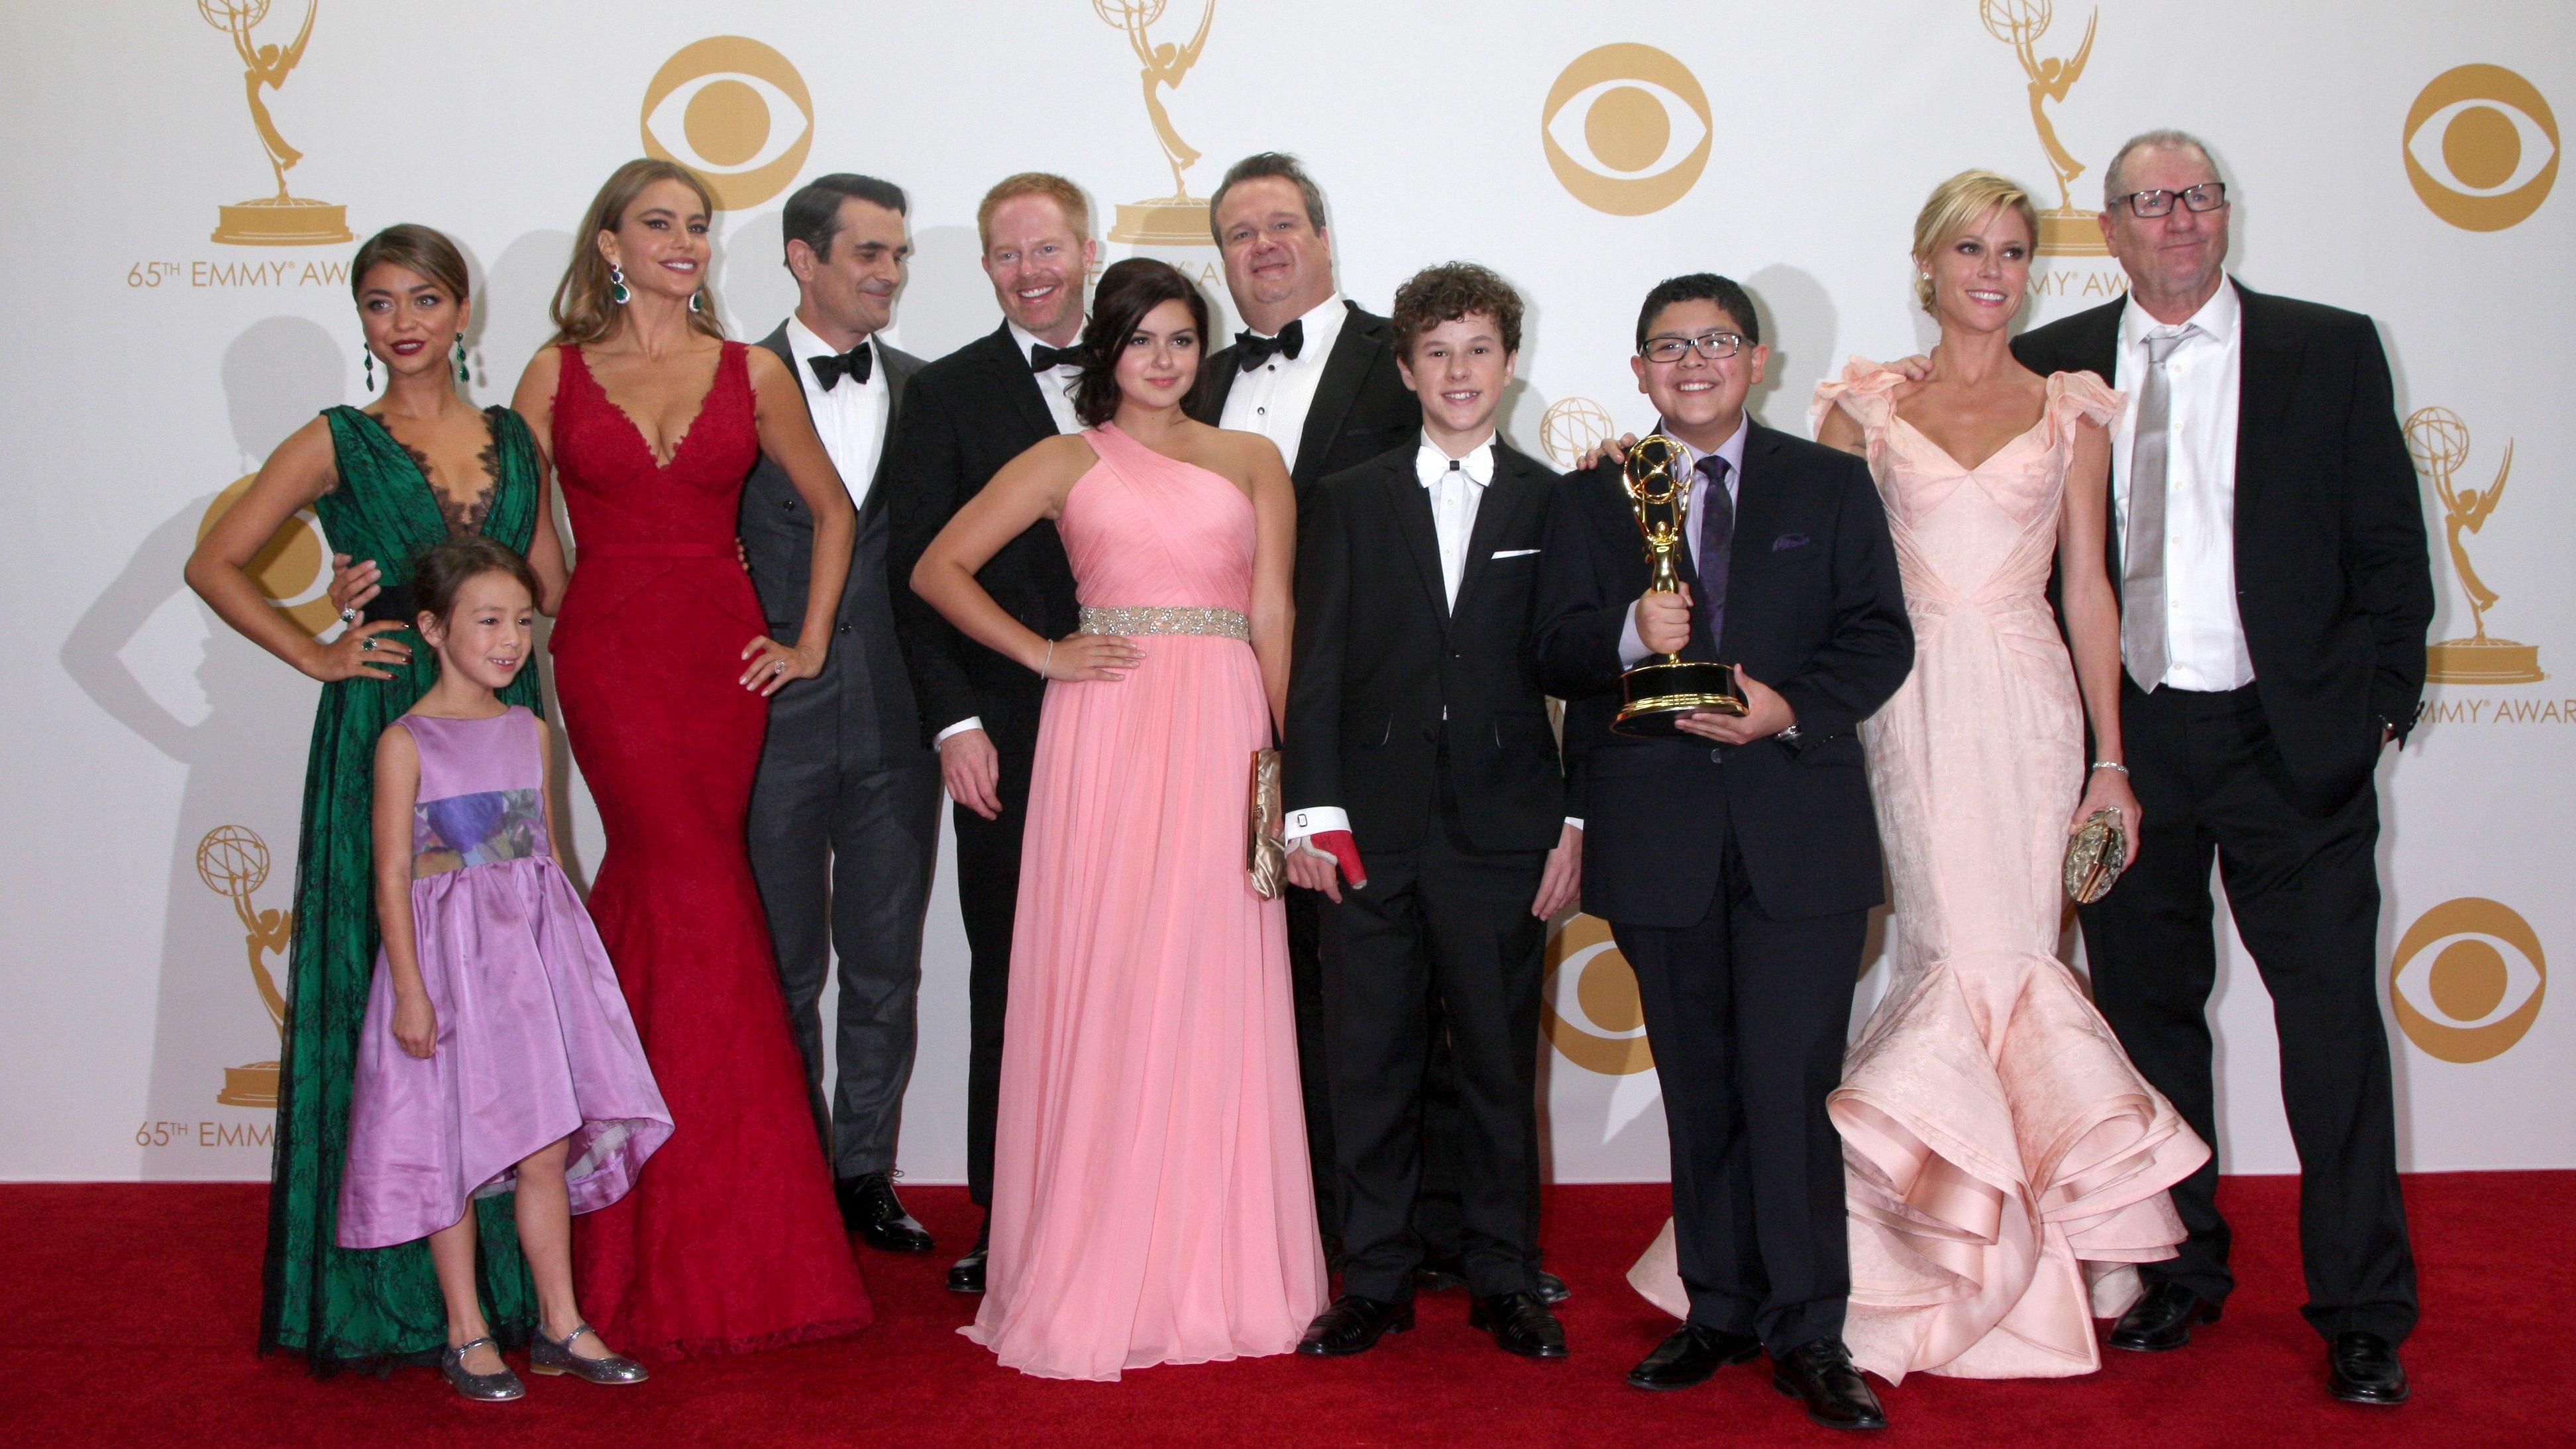 cast of Modern Family at the Emmy Awards